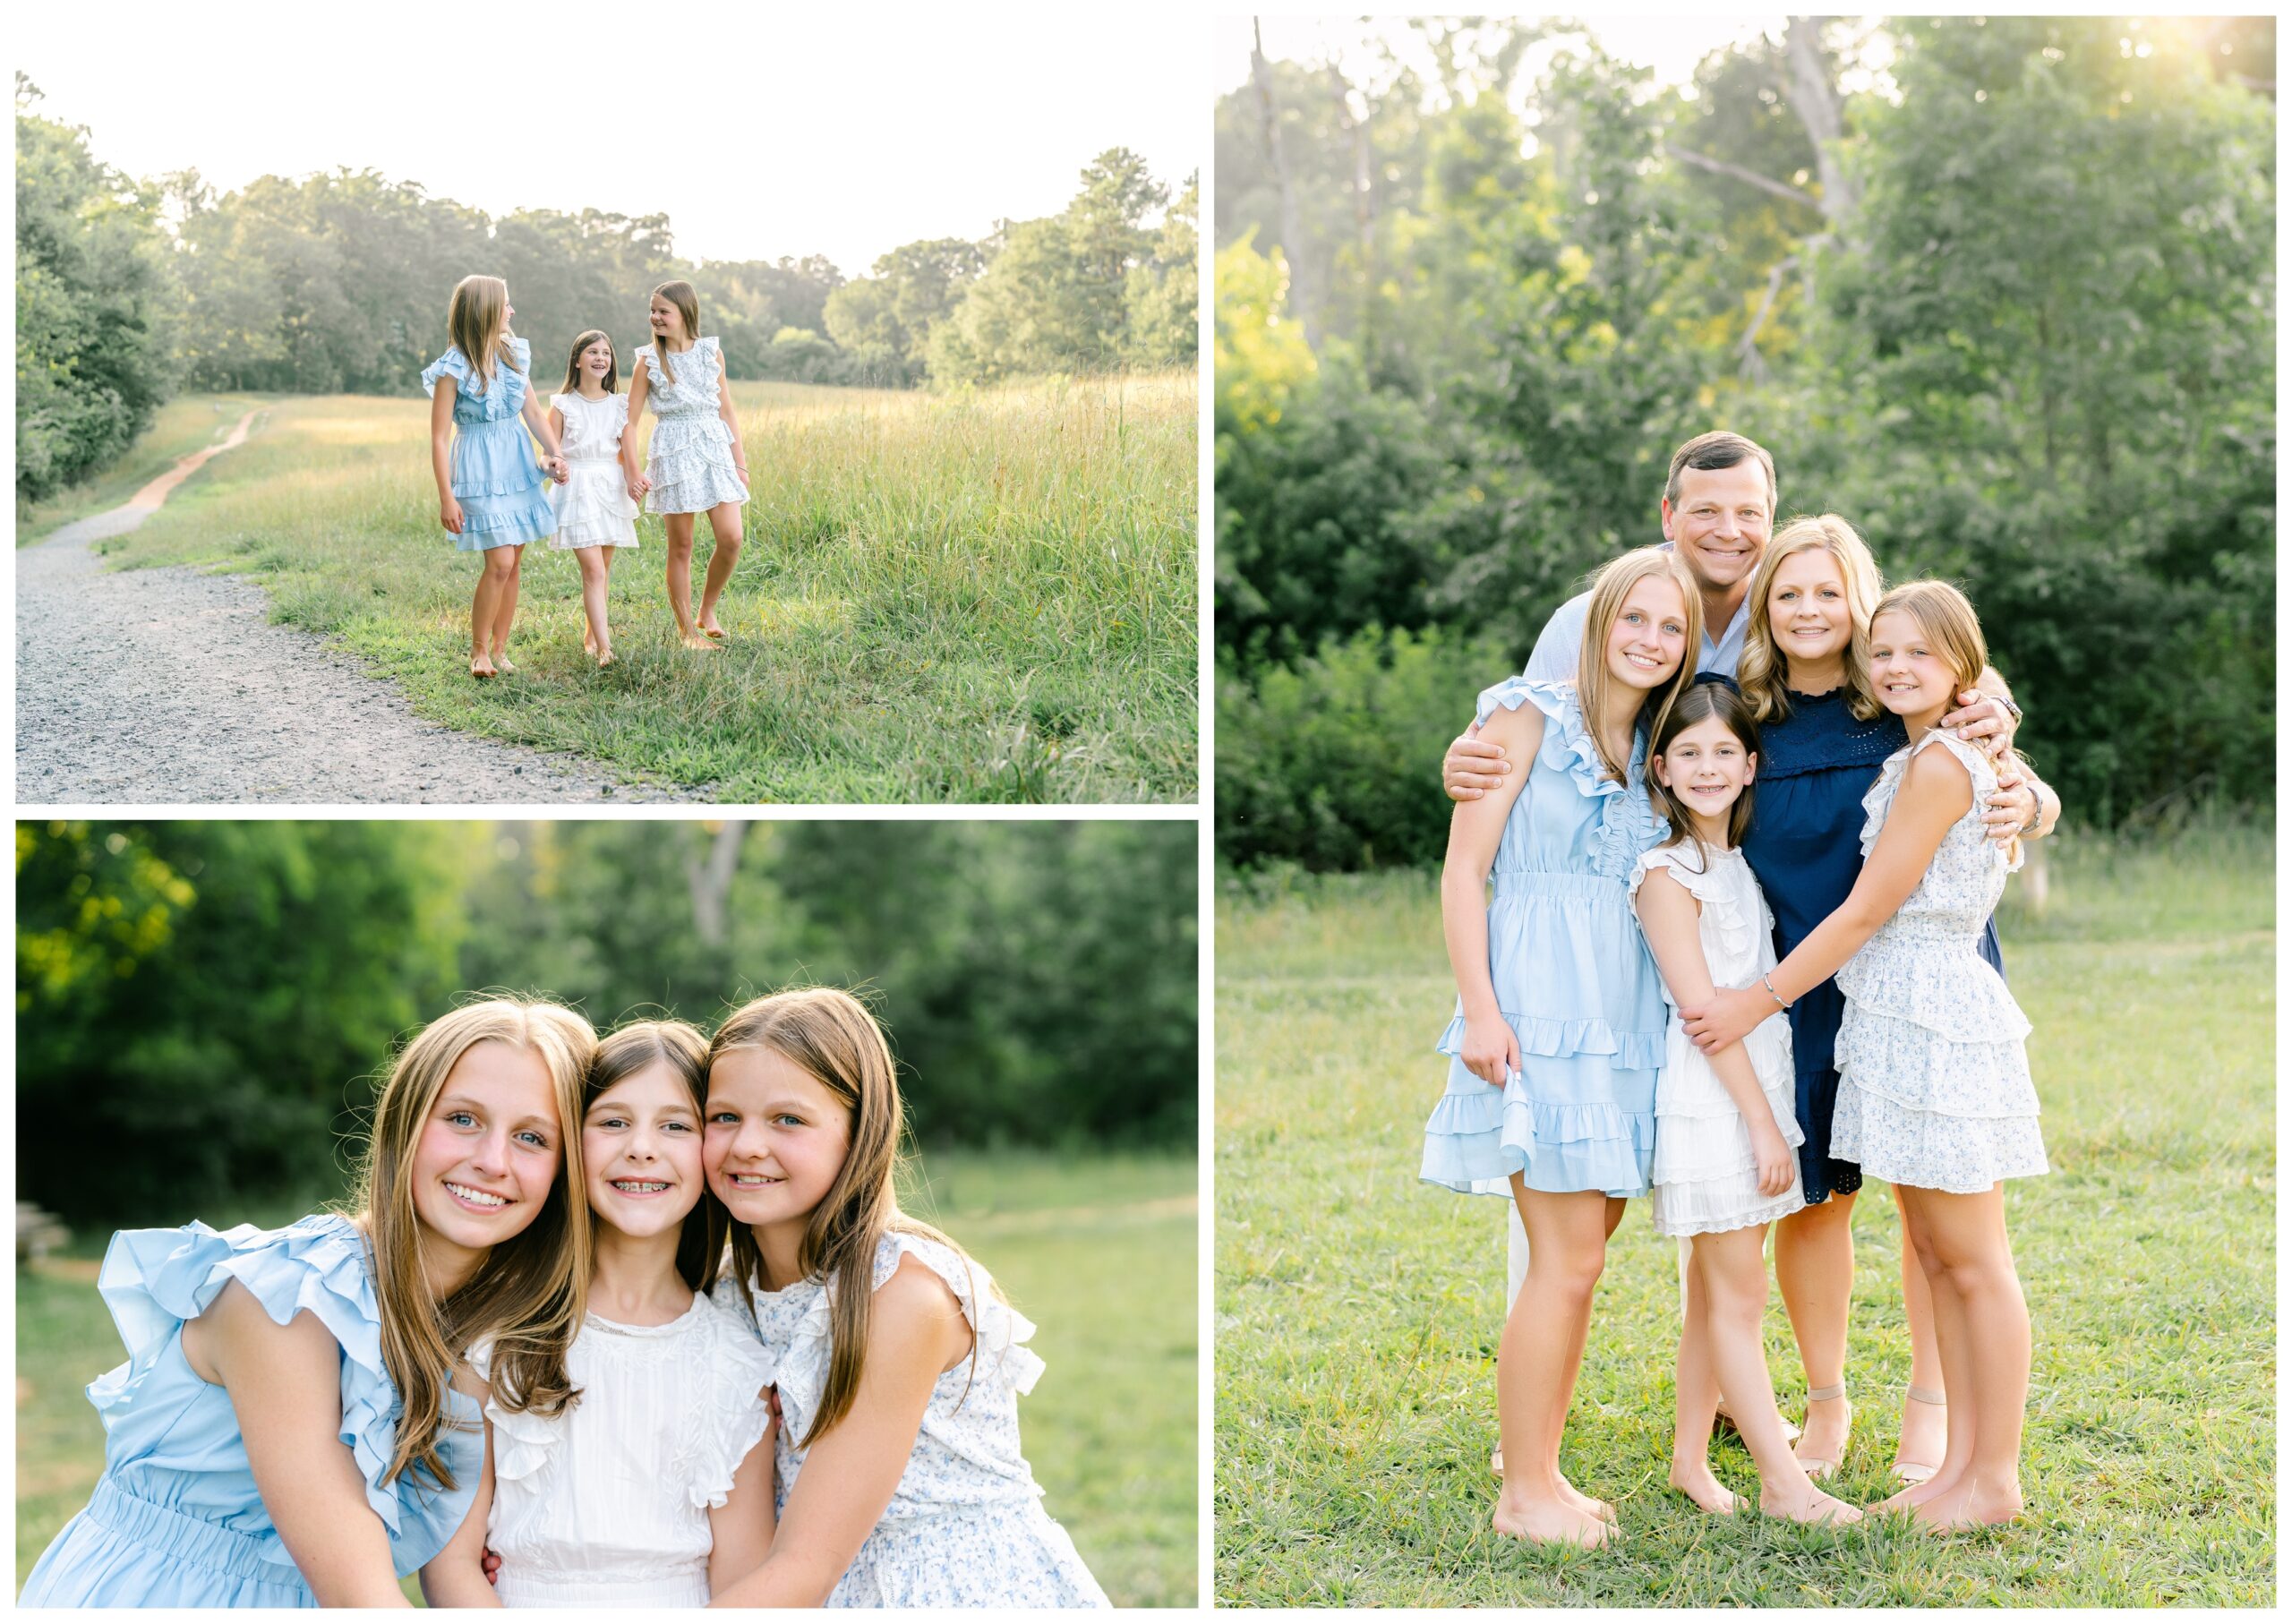 Three photos in a collage of a family with three daughters posing for portraits in a field by photographer in Atlanta Lindsey Powell.